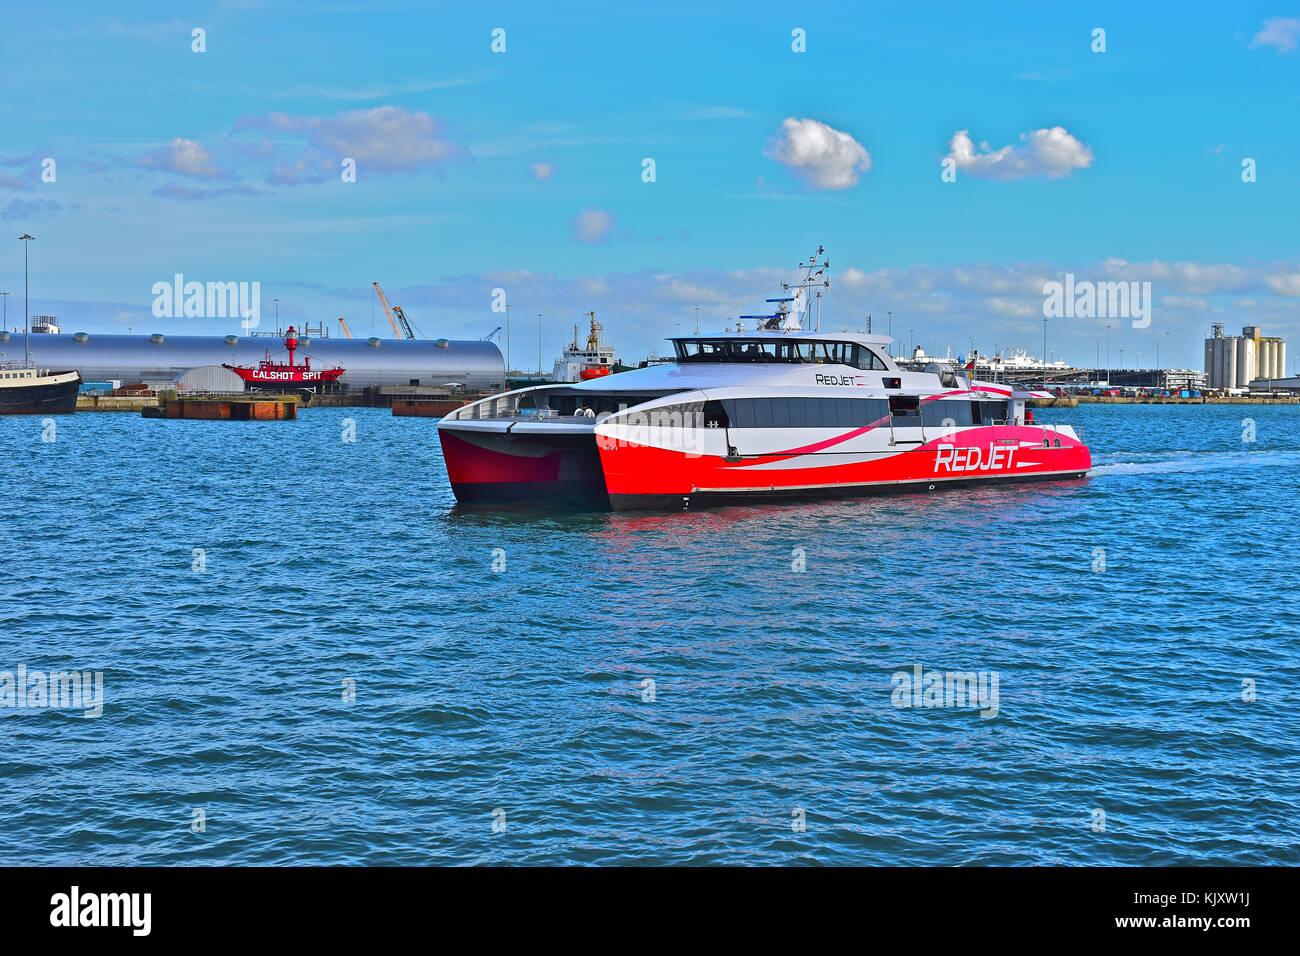 Red Jet 6 high speed catamaran passenger ferry approaches Town Quay in Southampton from West Cowes, Isle of Wight Stock Photo